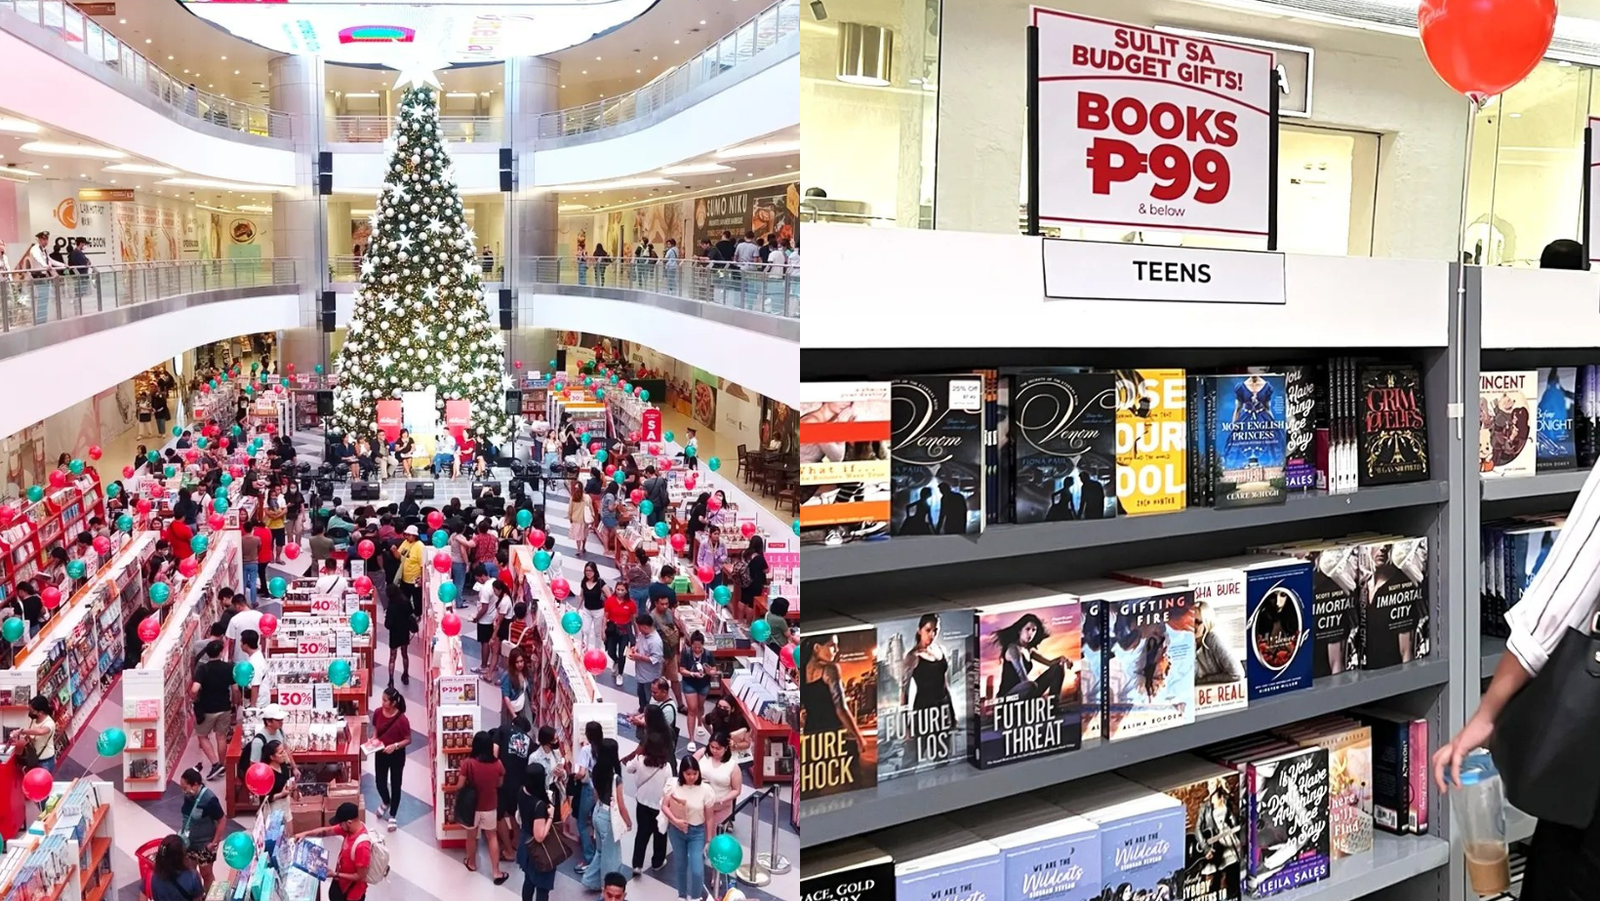 P99 Books, Up to 80% OFF on Items, and Signing Events Are Up for Grabs at This Book Fair